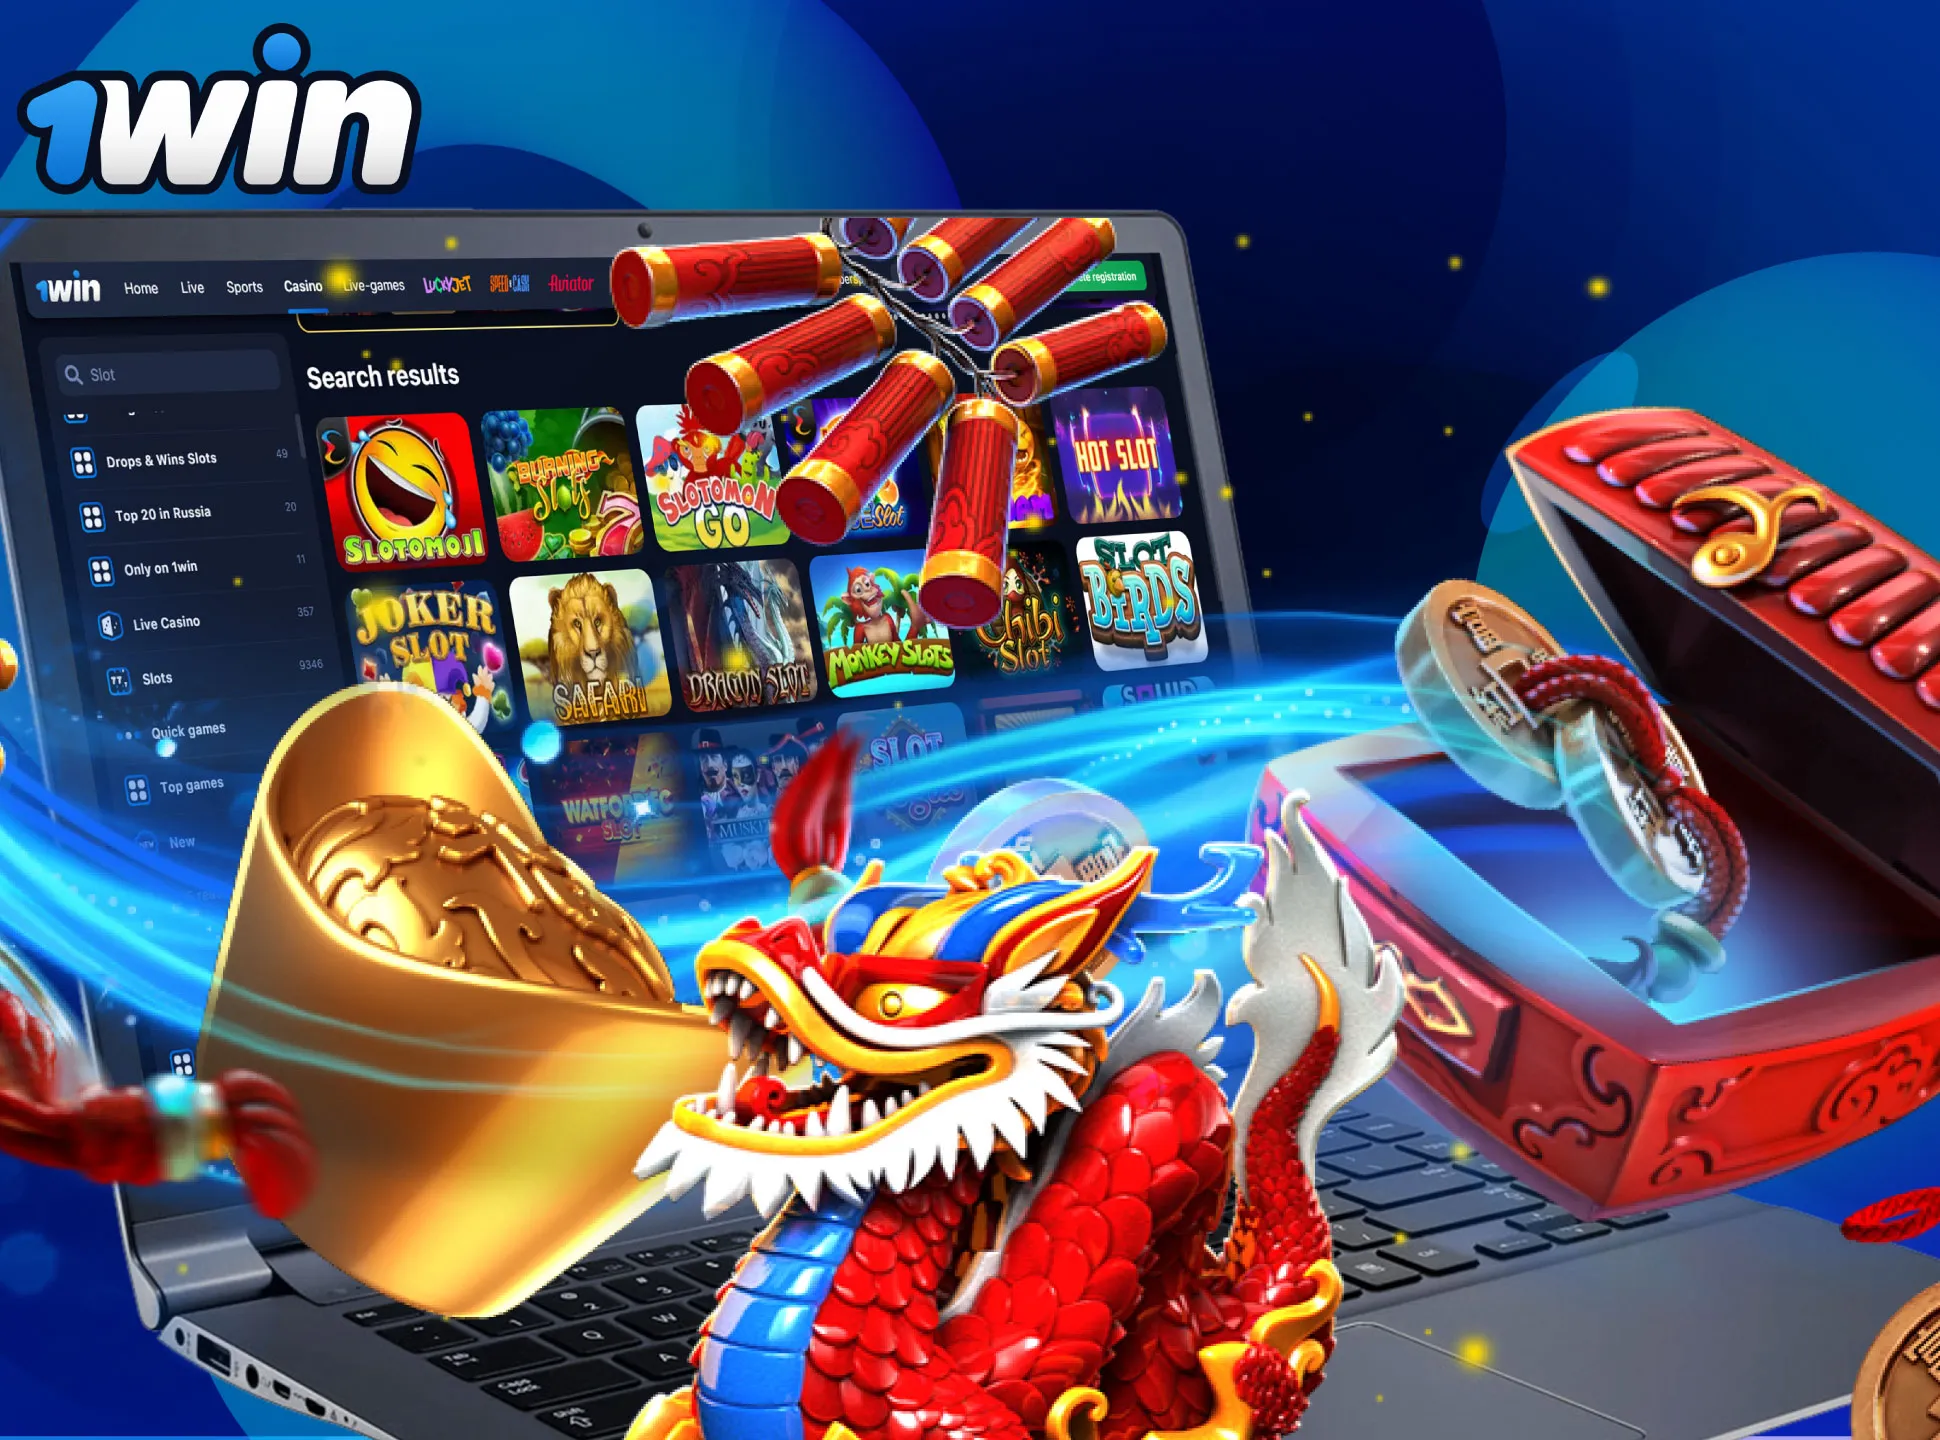 1win cooperates with different game developers to provide various slots.